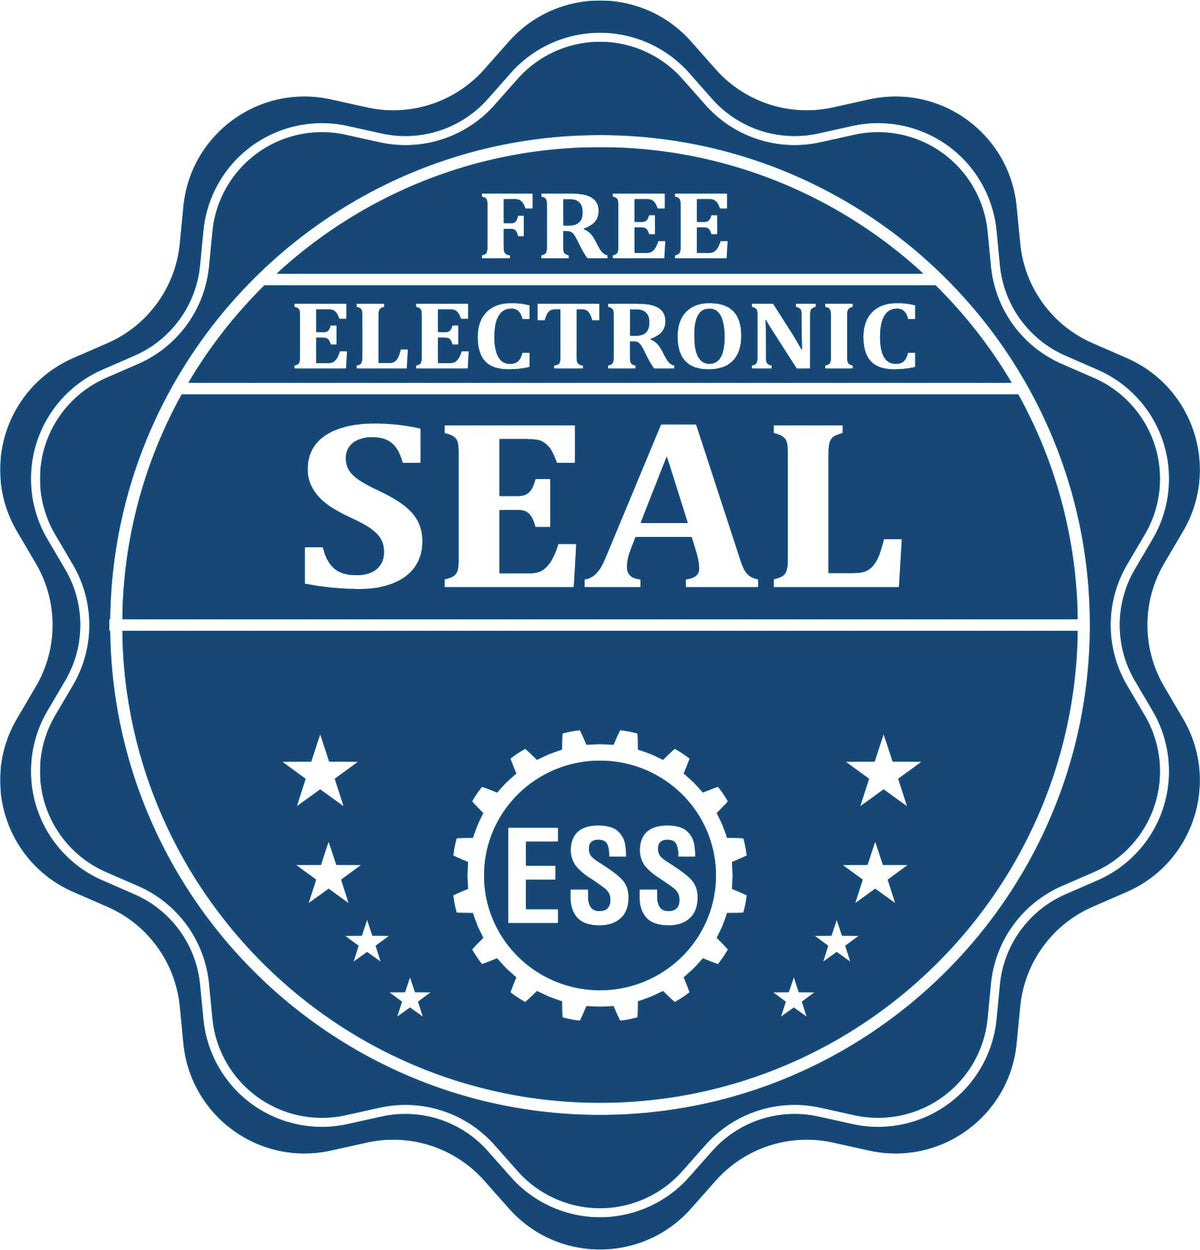 A badge showing a free electronic seal for the Gift Georgia Landscape Architect Seal with stars and the ESS gear on the emblem.